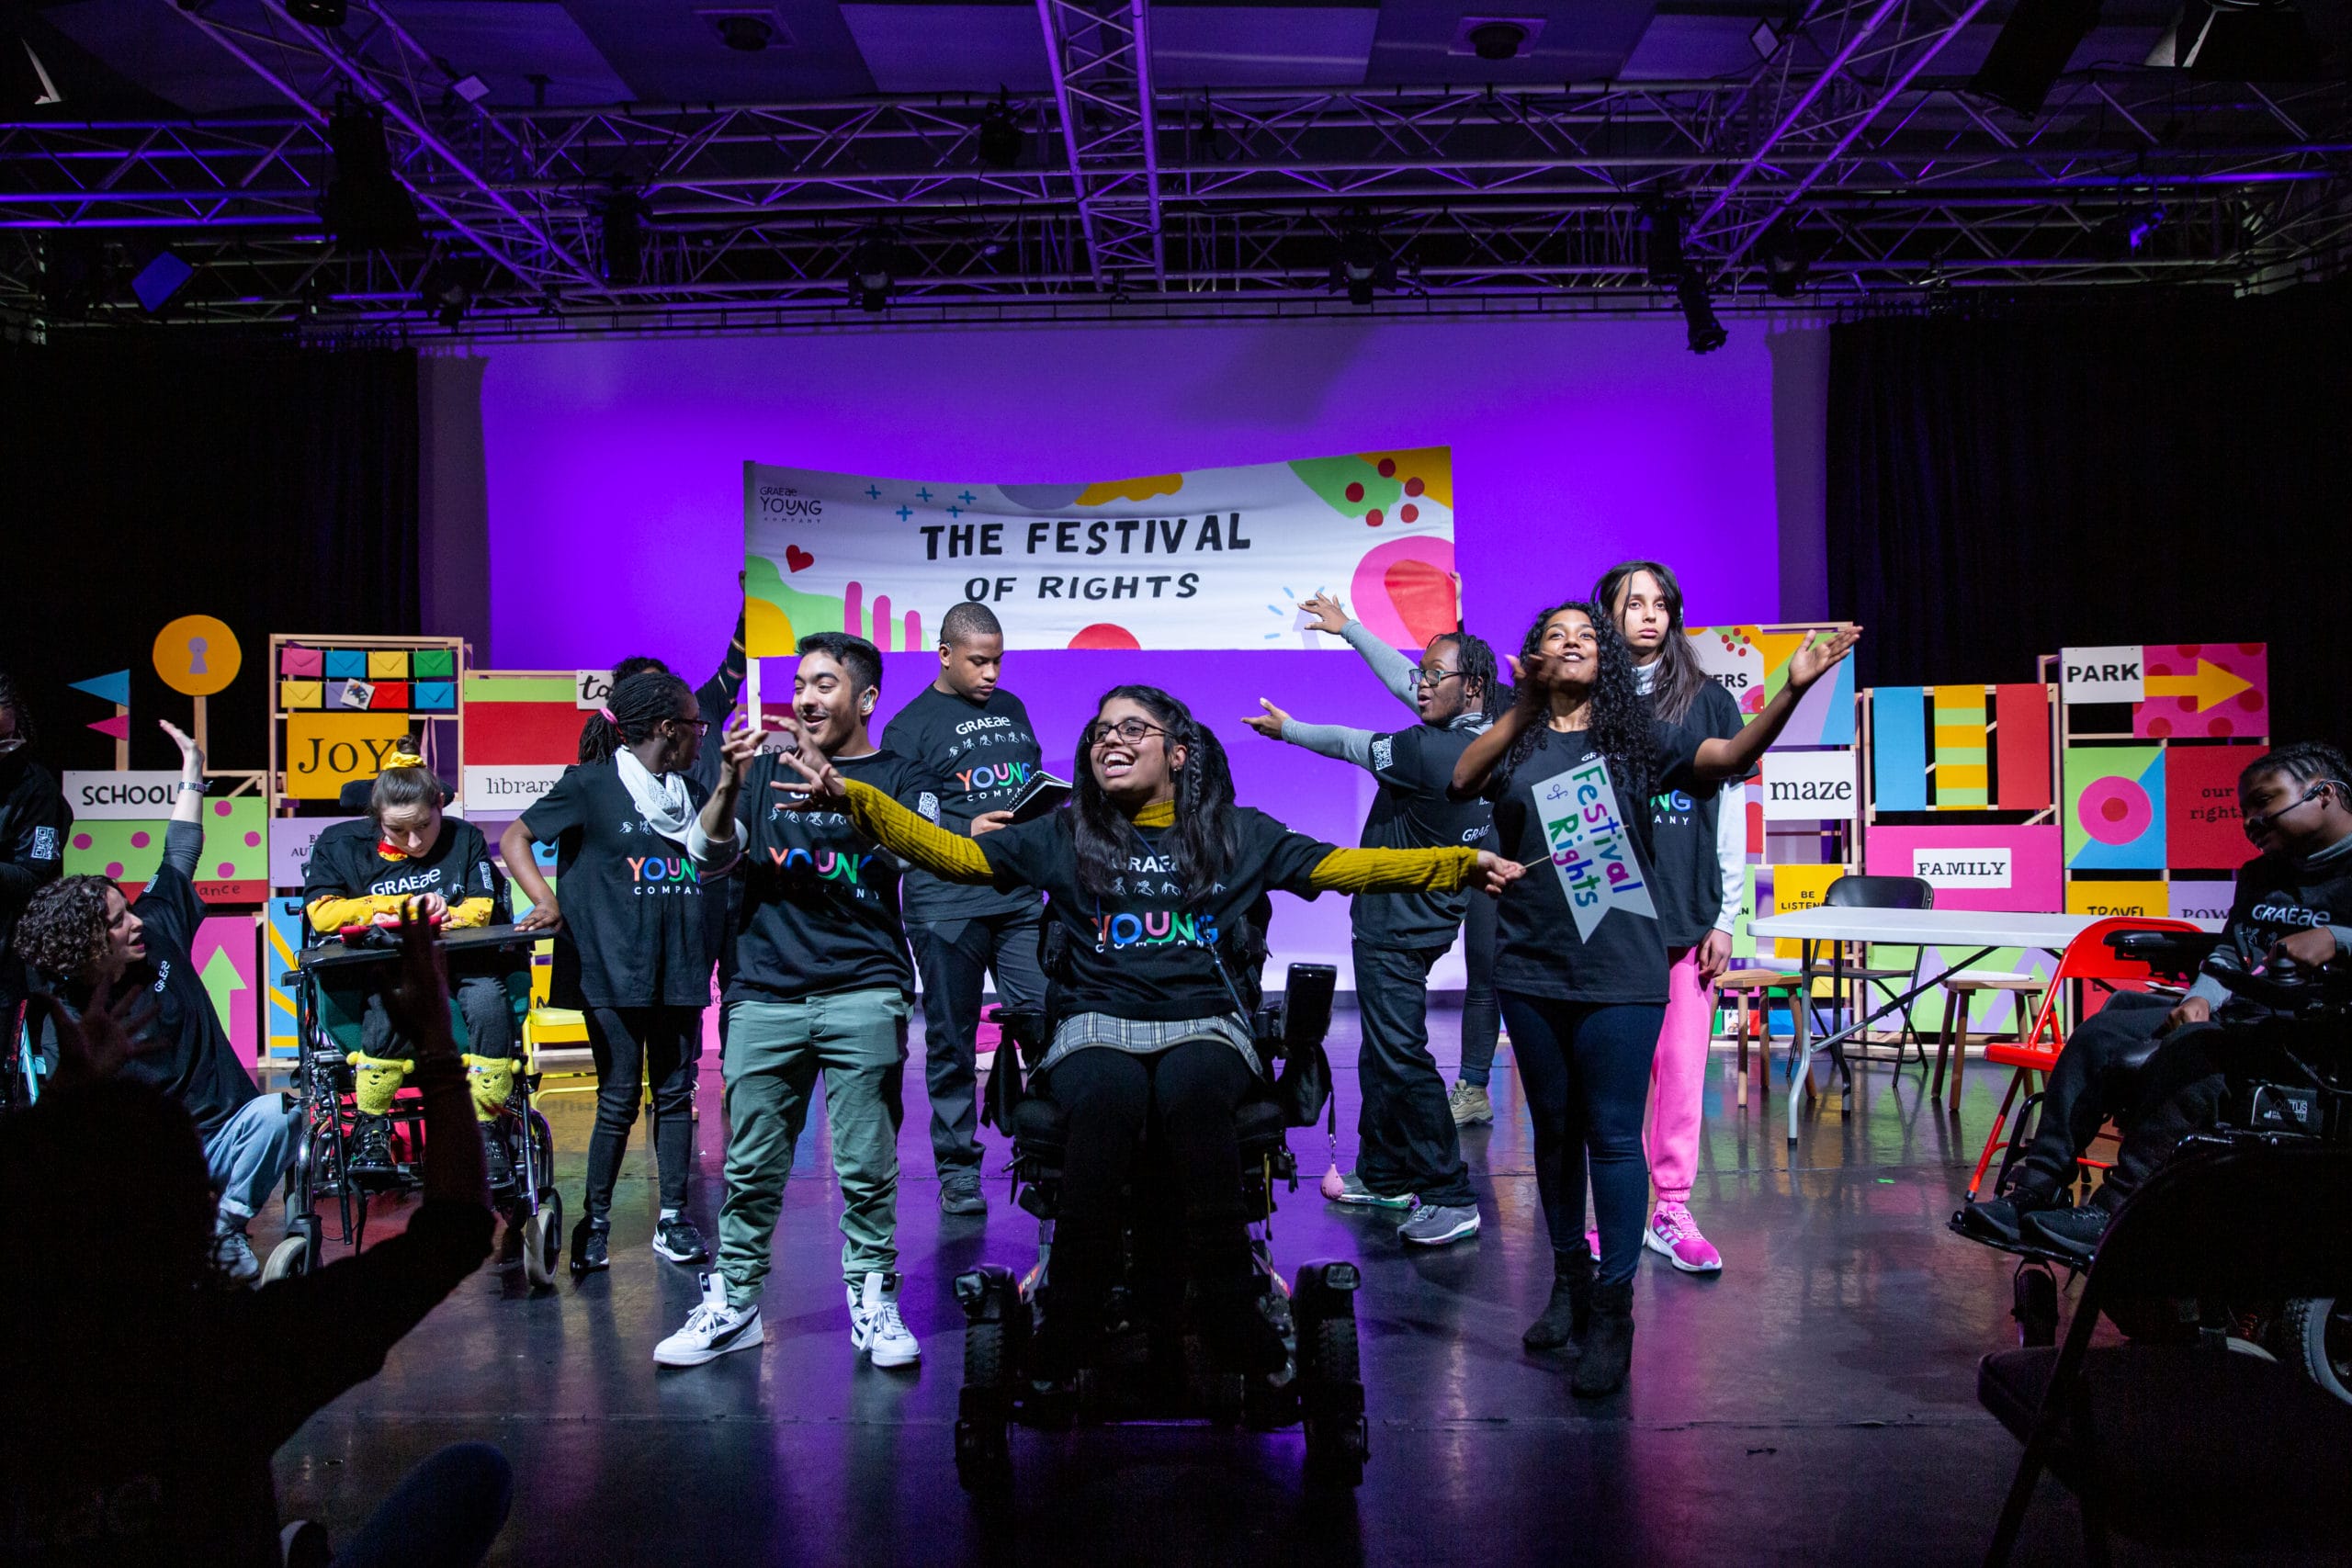 The cast of the Graeae show 'The Festival of Rights' all stand centre stage. A young girl in the middle in a wheelchair has her arms outstretched, and smiles a wide smile.